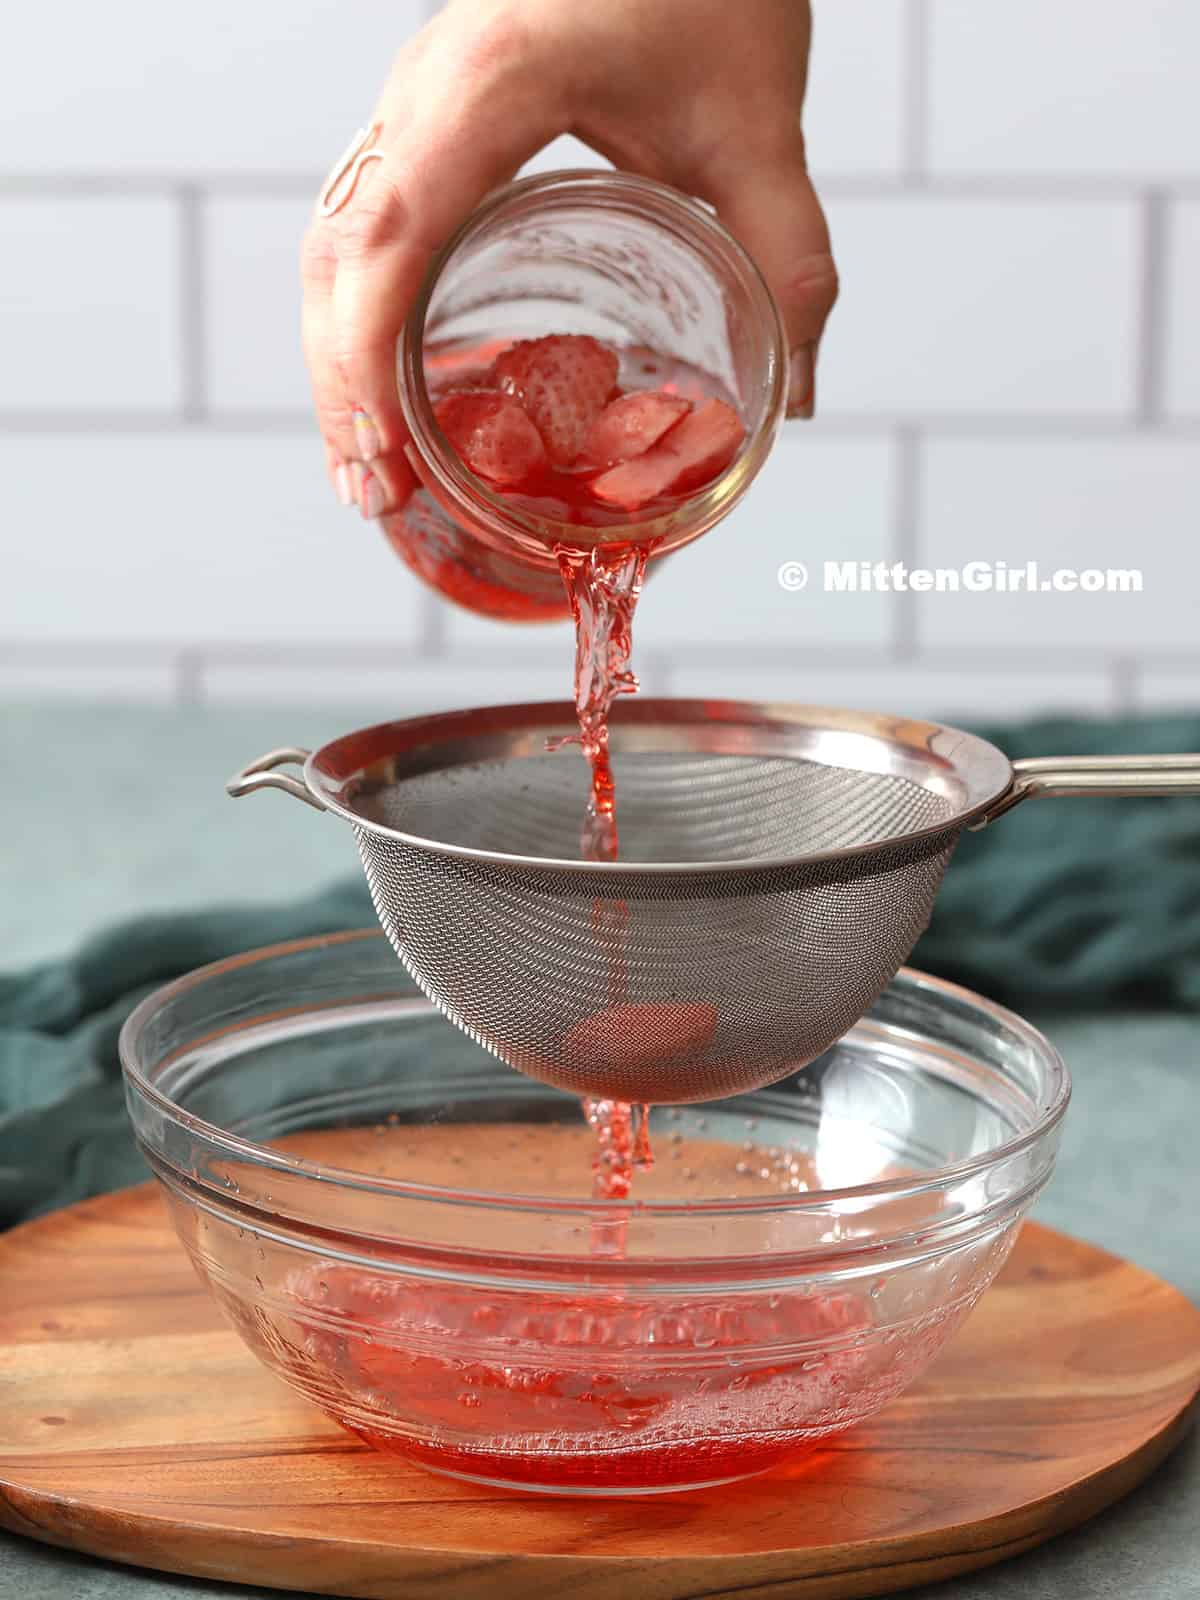 Strawberry infused vodka being strained through a fine mesh sieve.